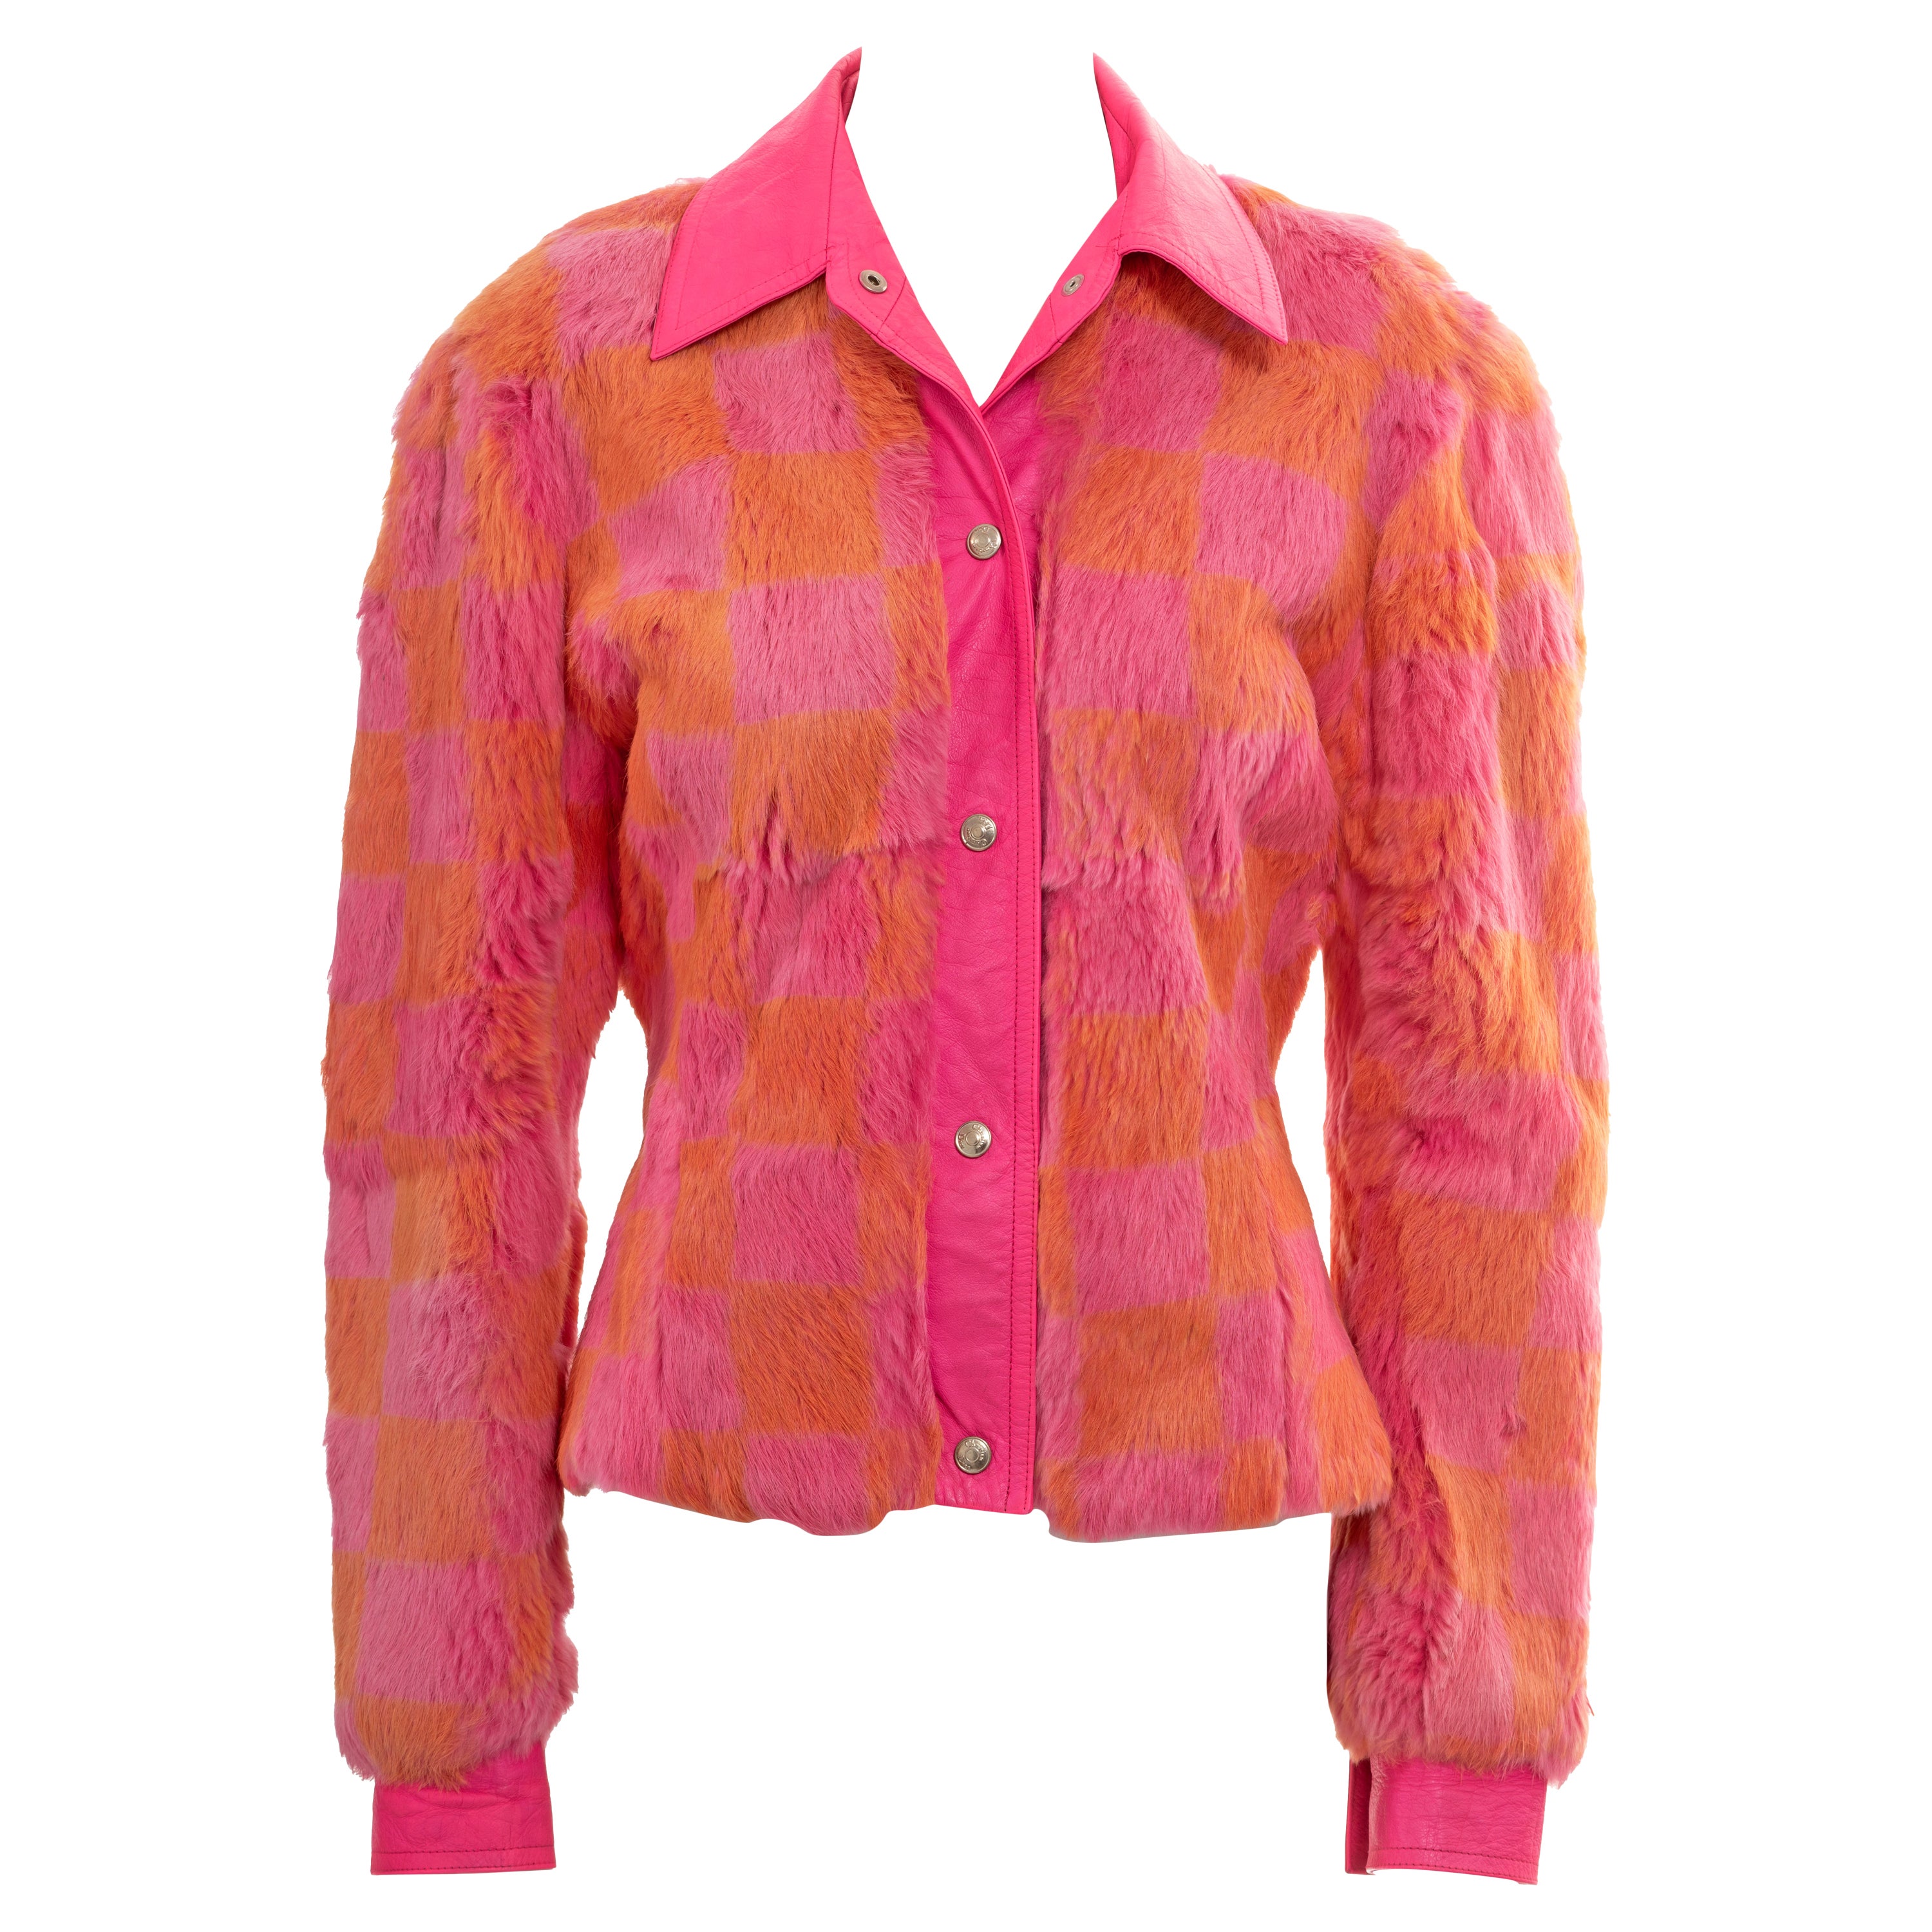 Christian Dior by John Galliano pink and orange fur shirt jacket, fw 2001 For Sale